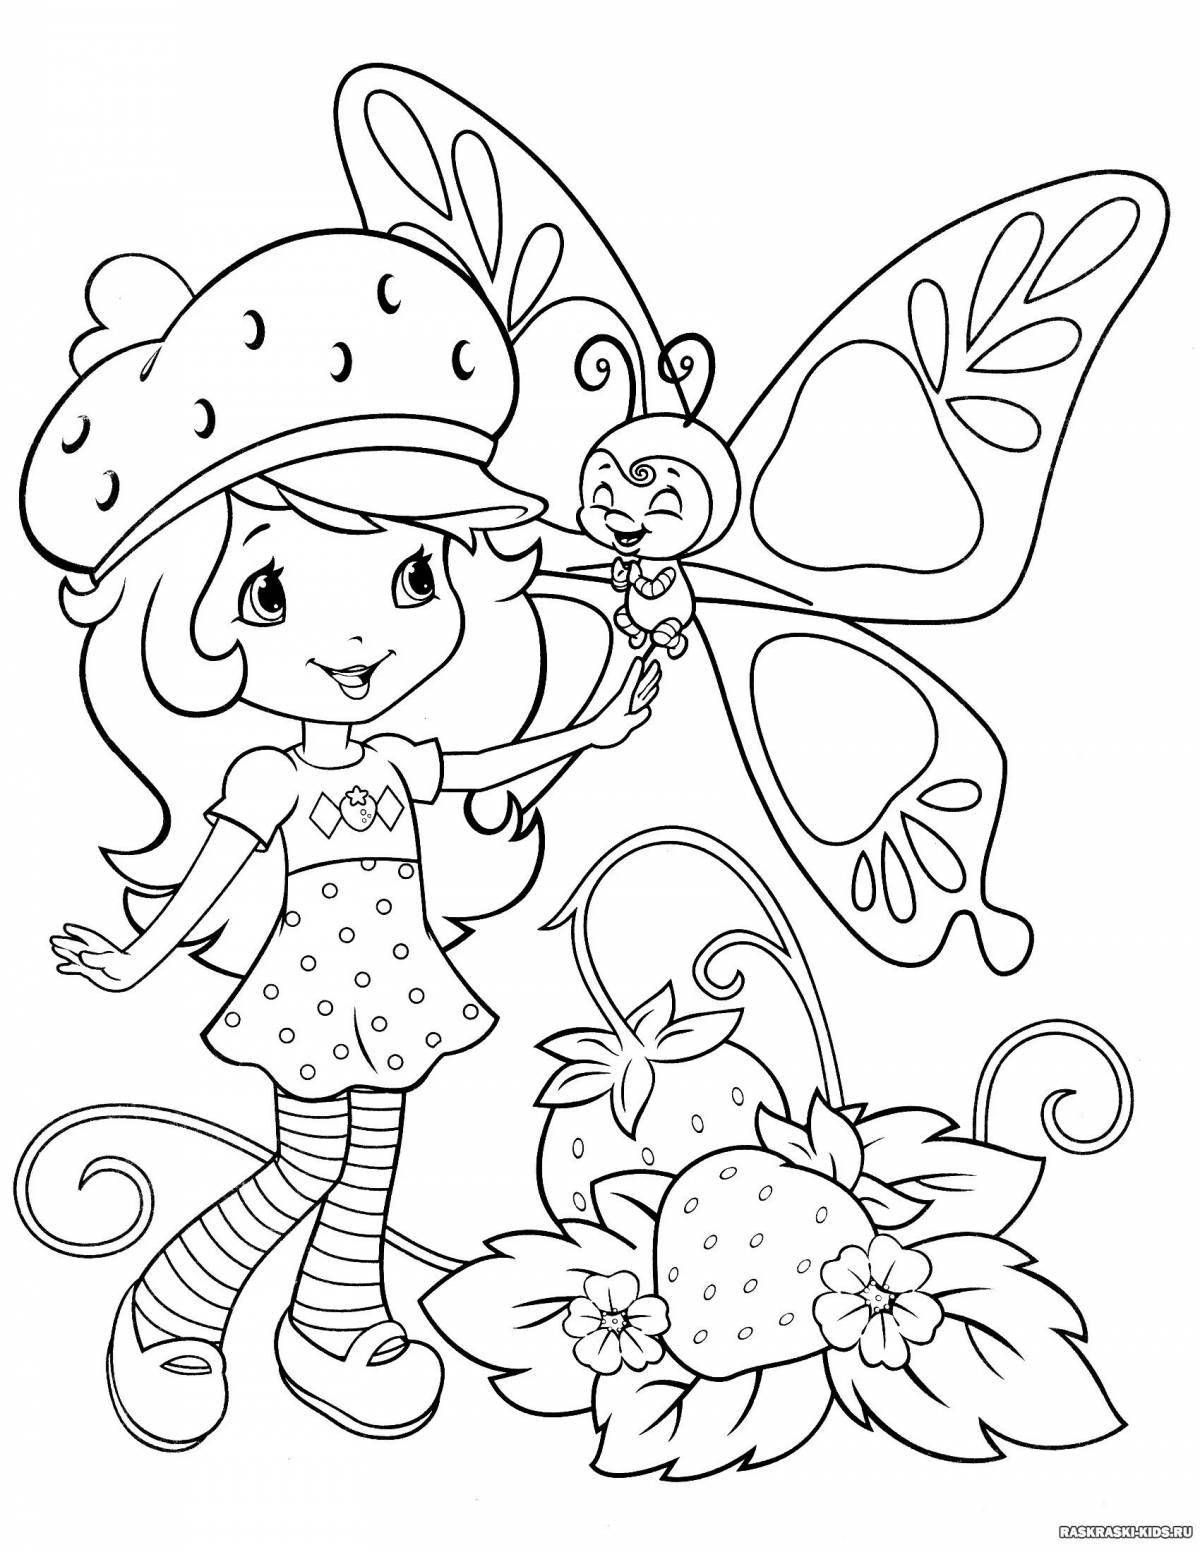 Fairytale coloring book for 6 year old girls